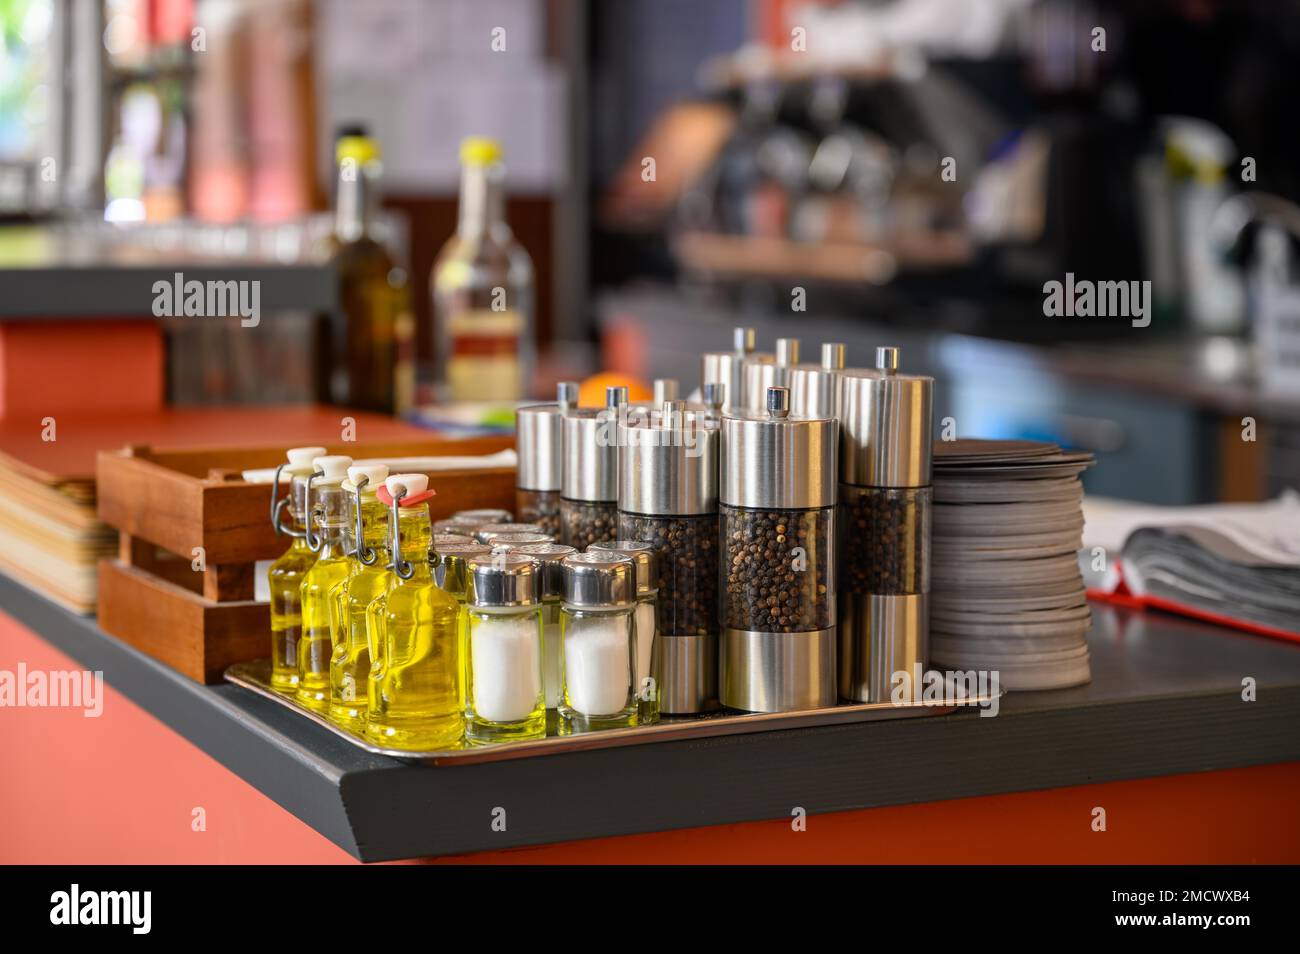 Salt and pepper shakers and small bottles of olive oil are placed on the counter of a restaurant Stock Photo